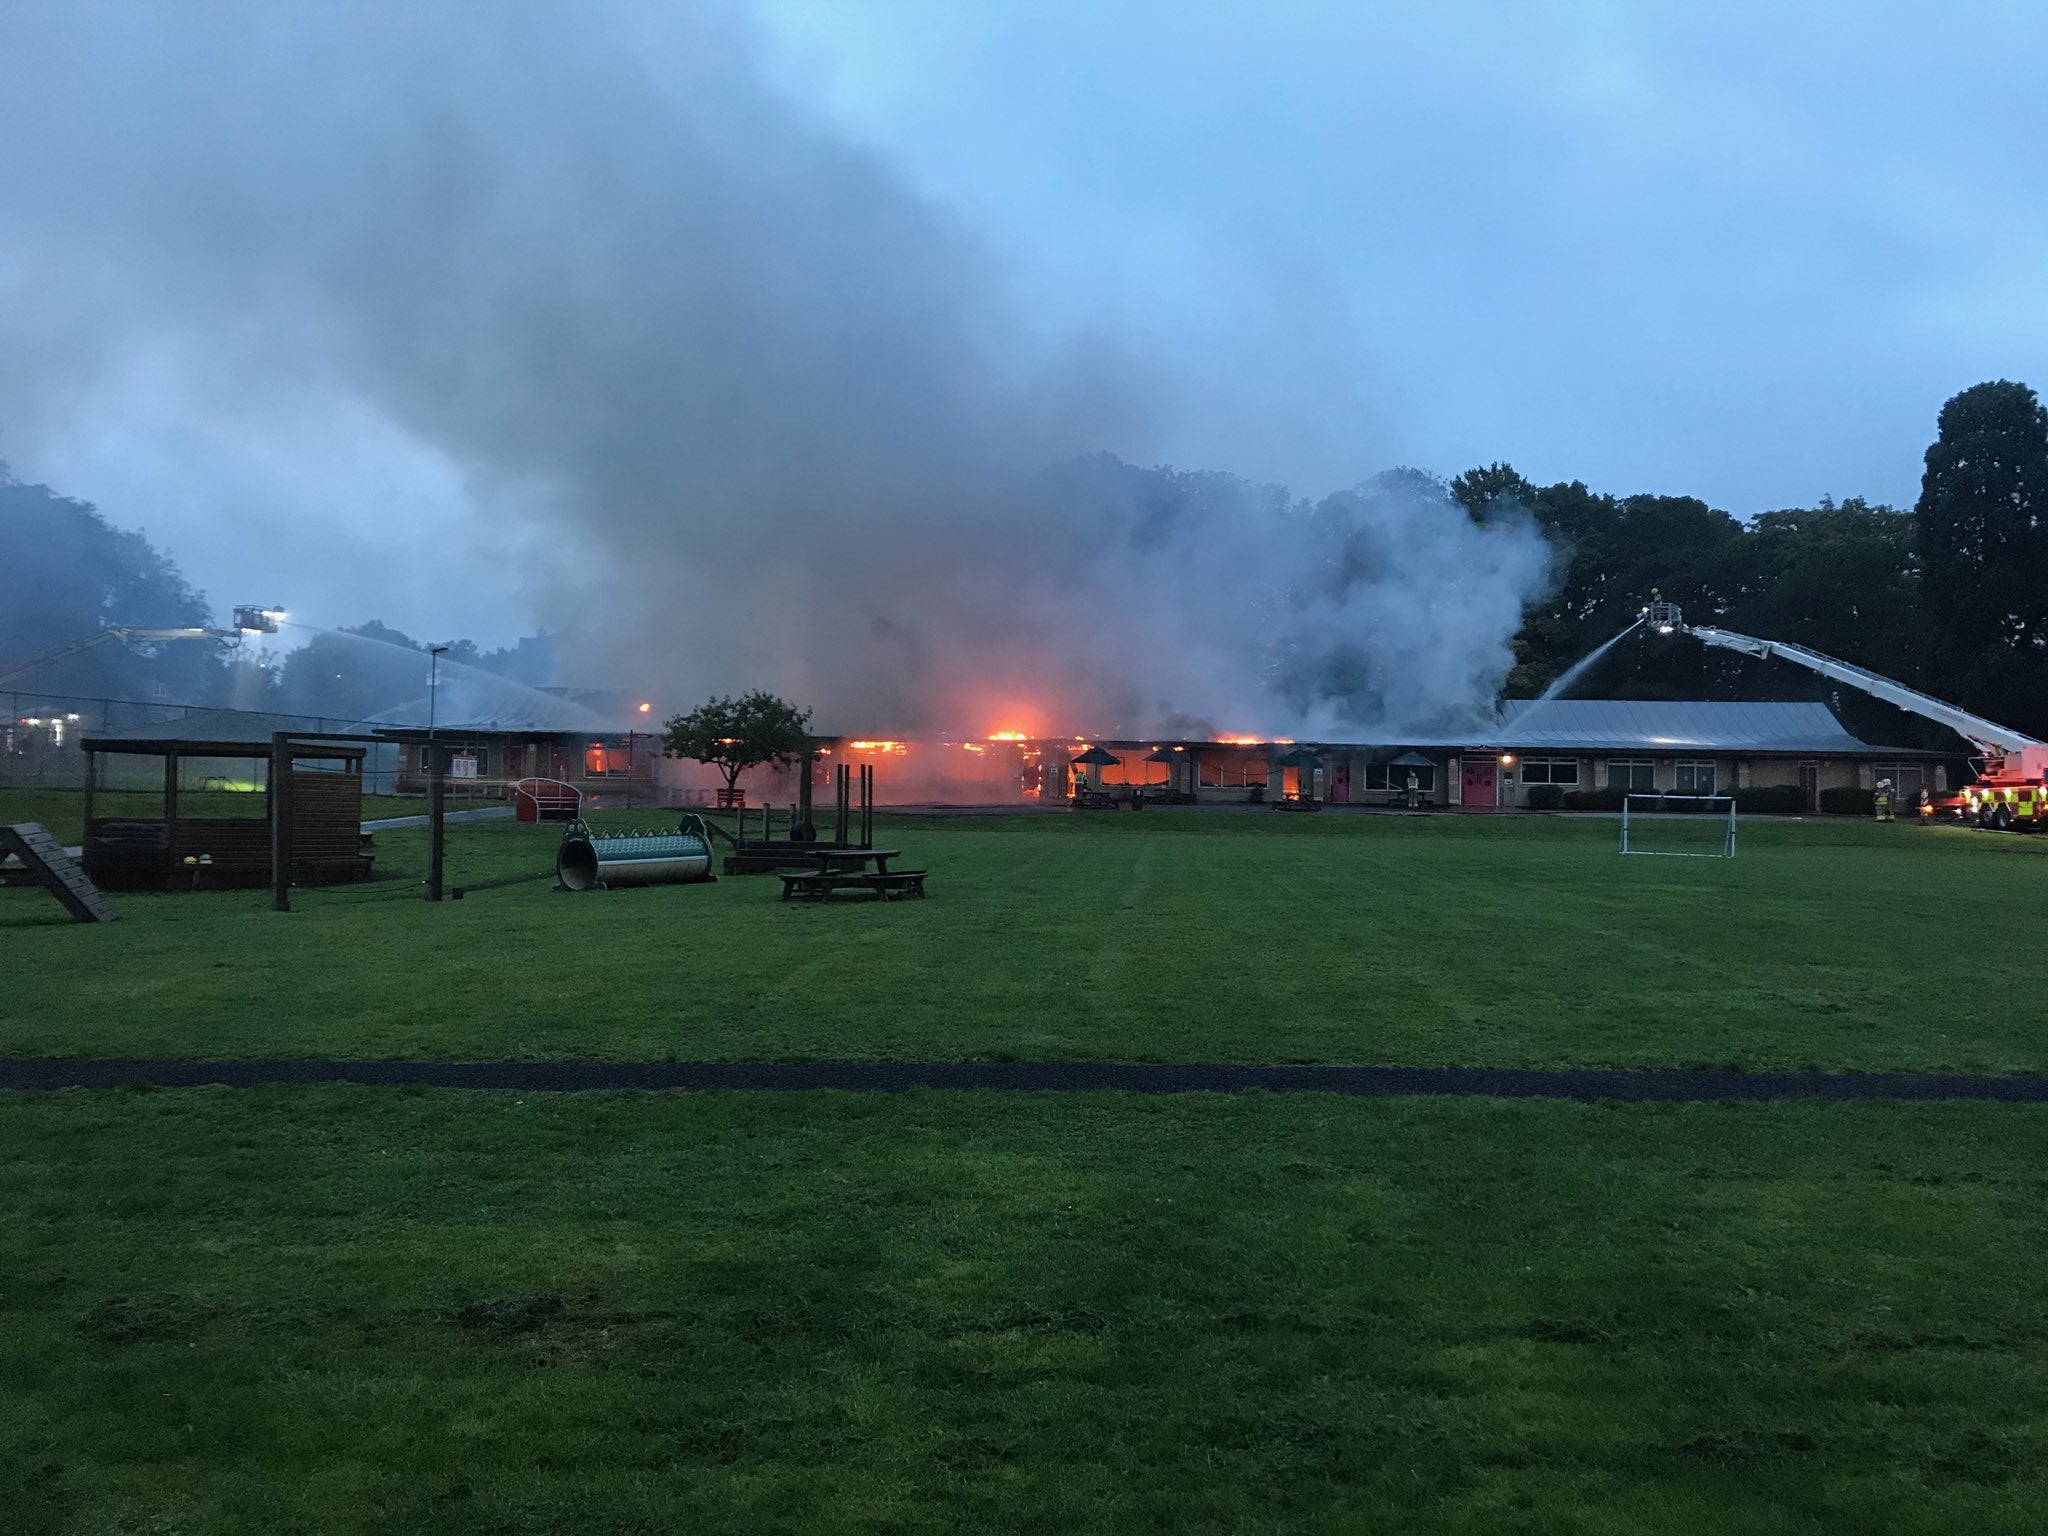 A fire at Ravensdale Infant School started by Brady in 2020